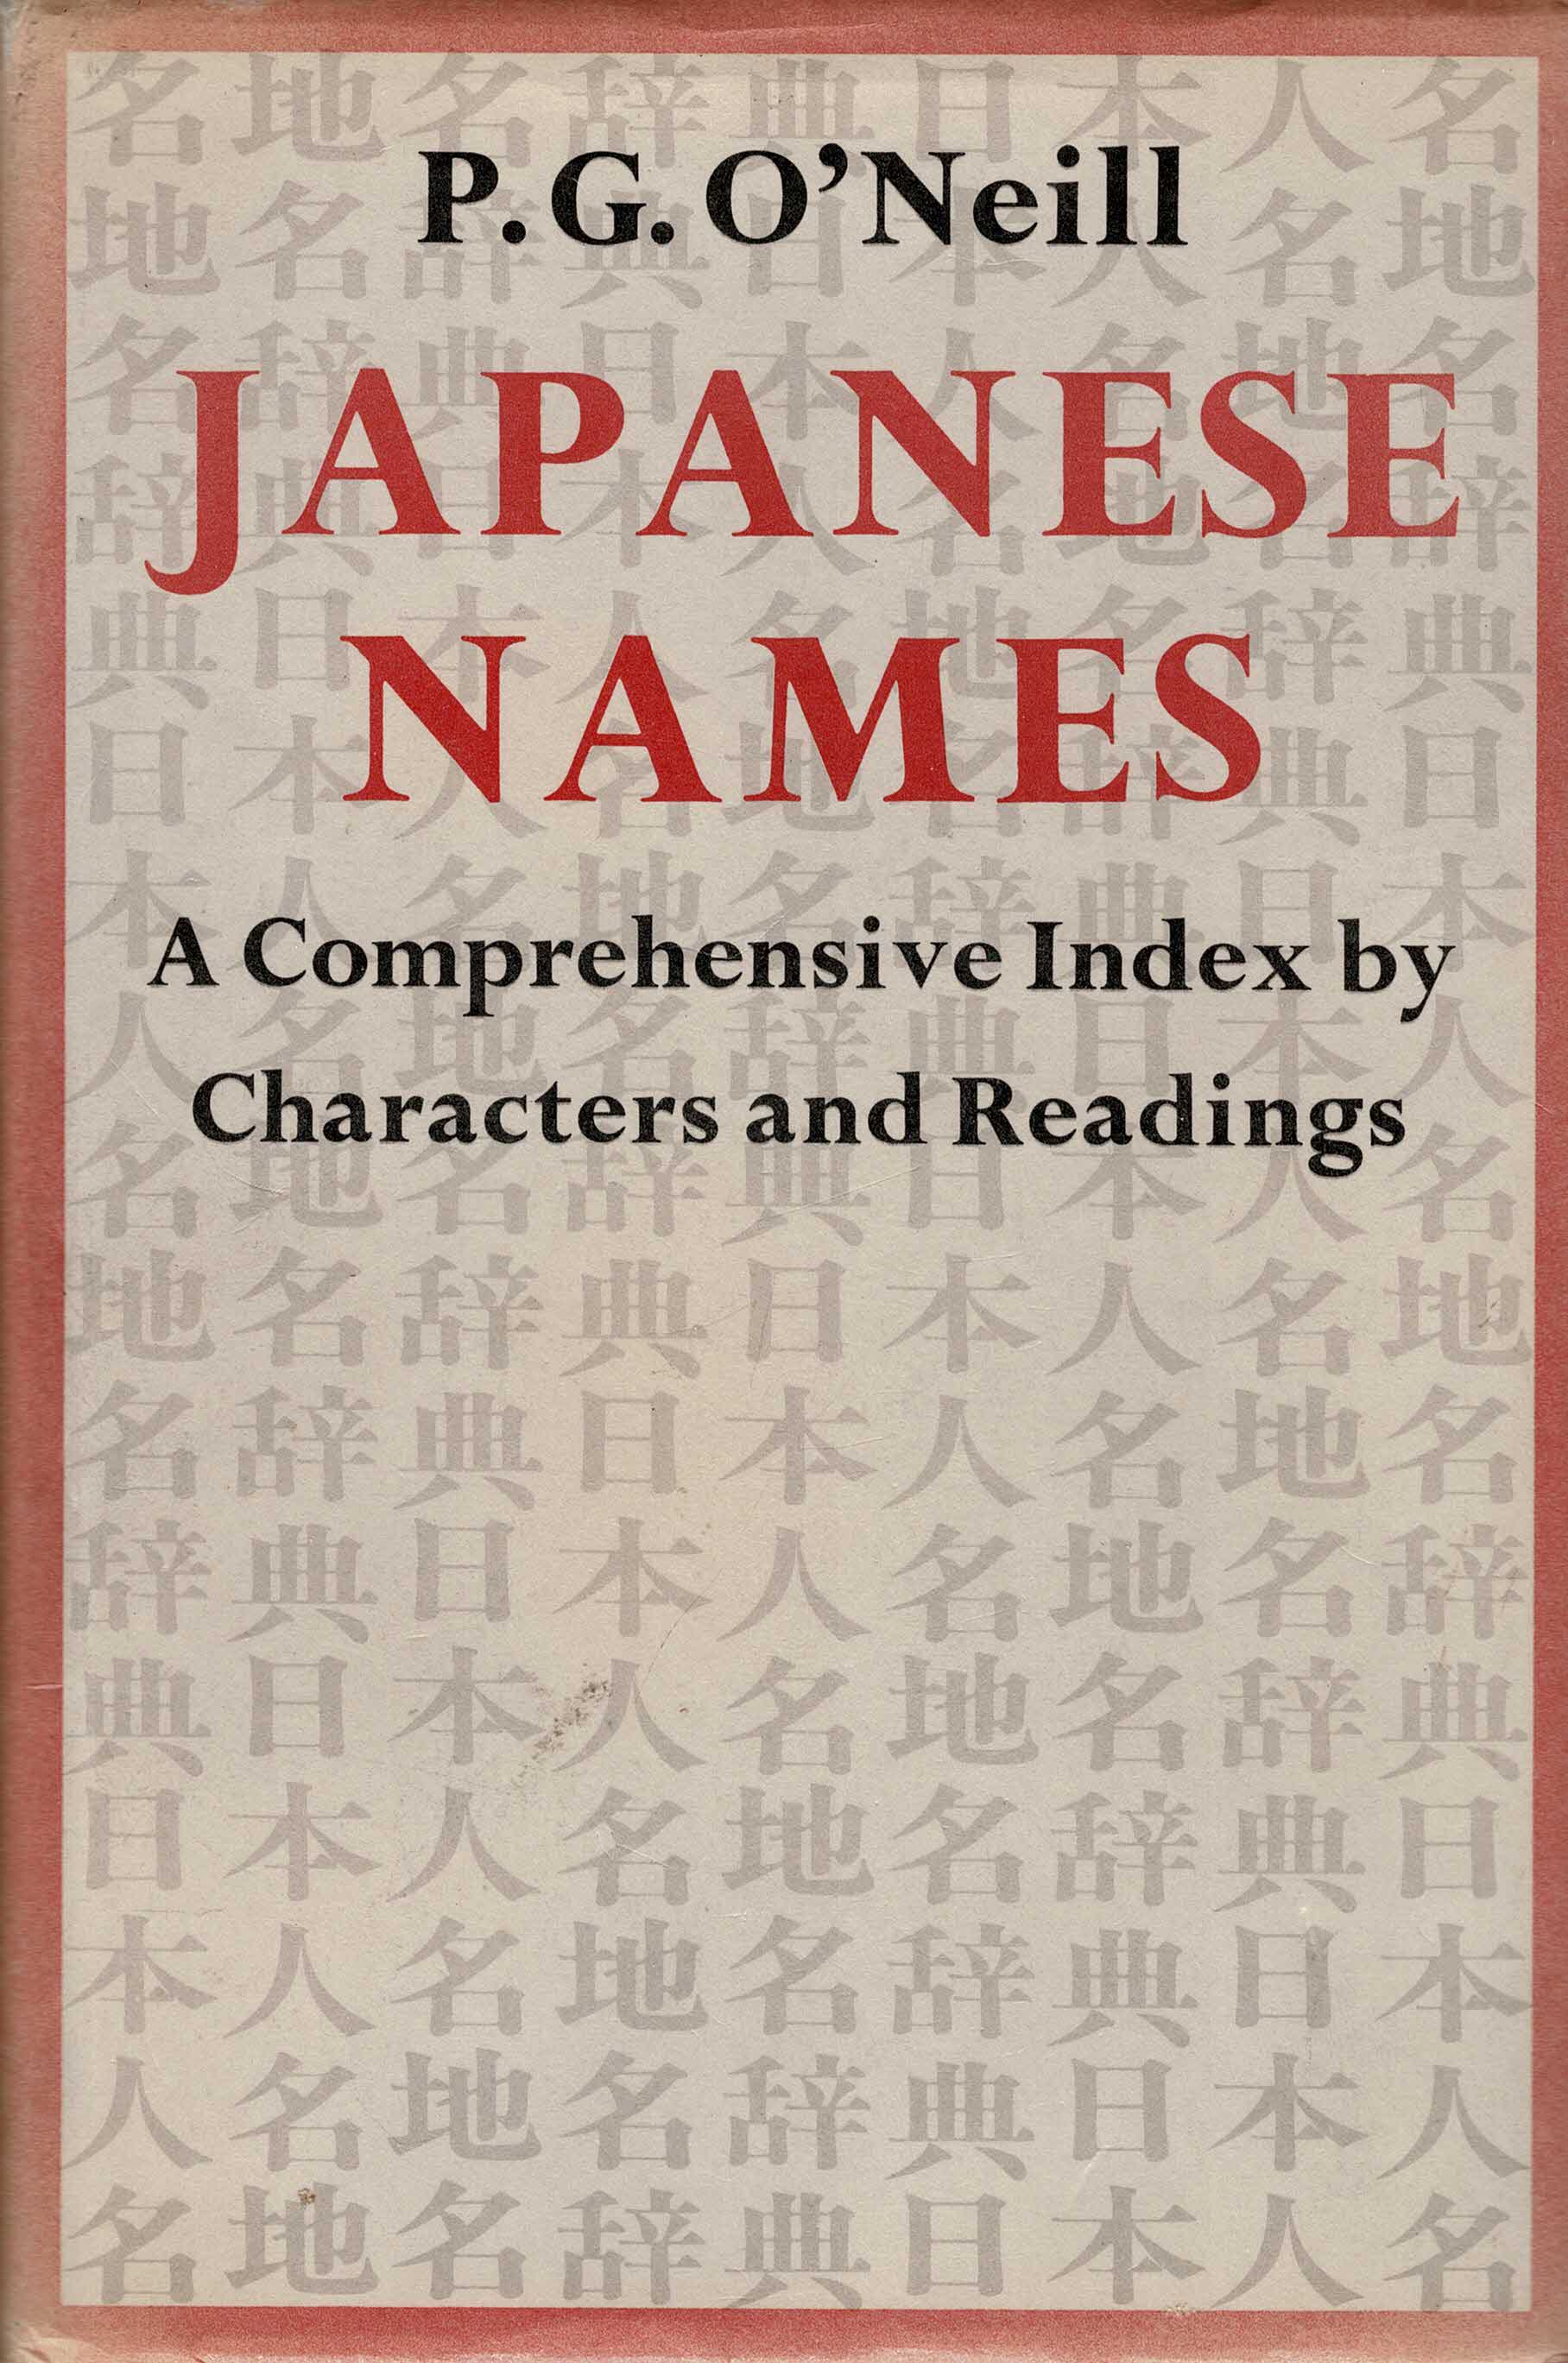 O'Neill, P.G. - Japanese Names - a Comprehensive Index By Characters and Readings